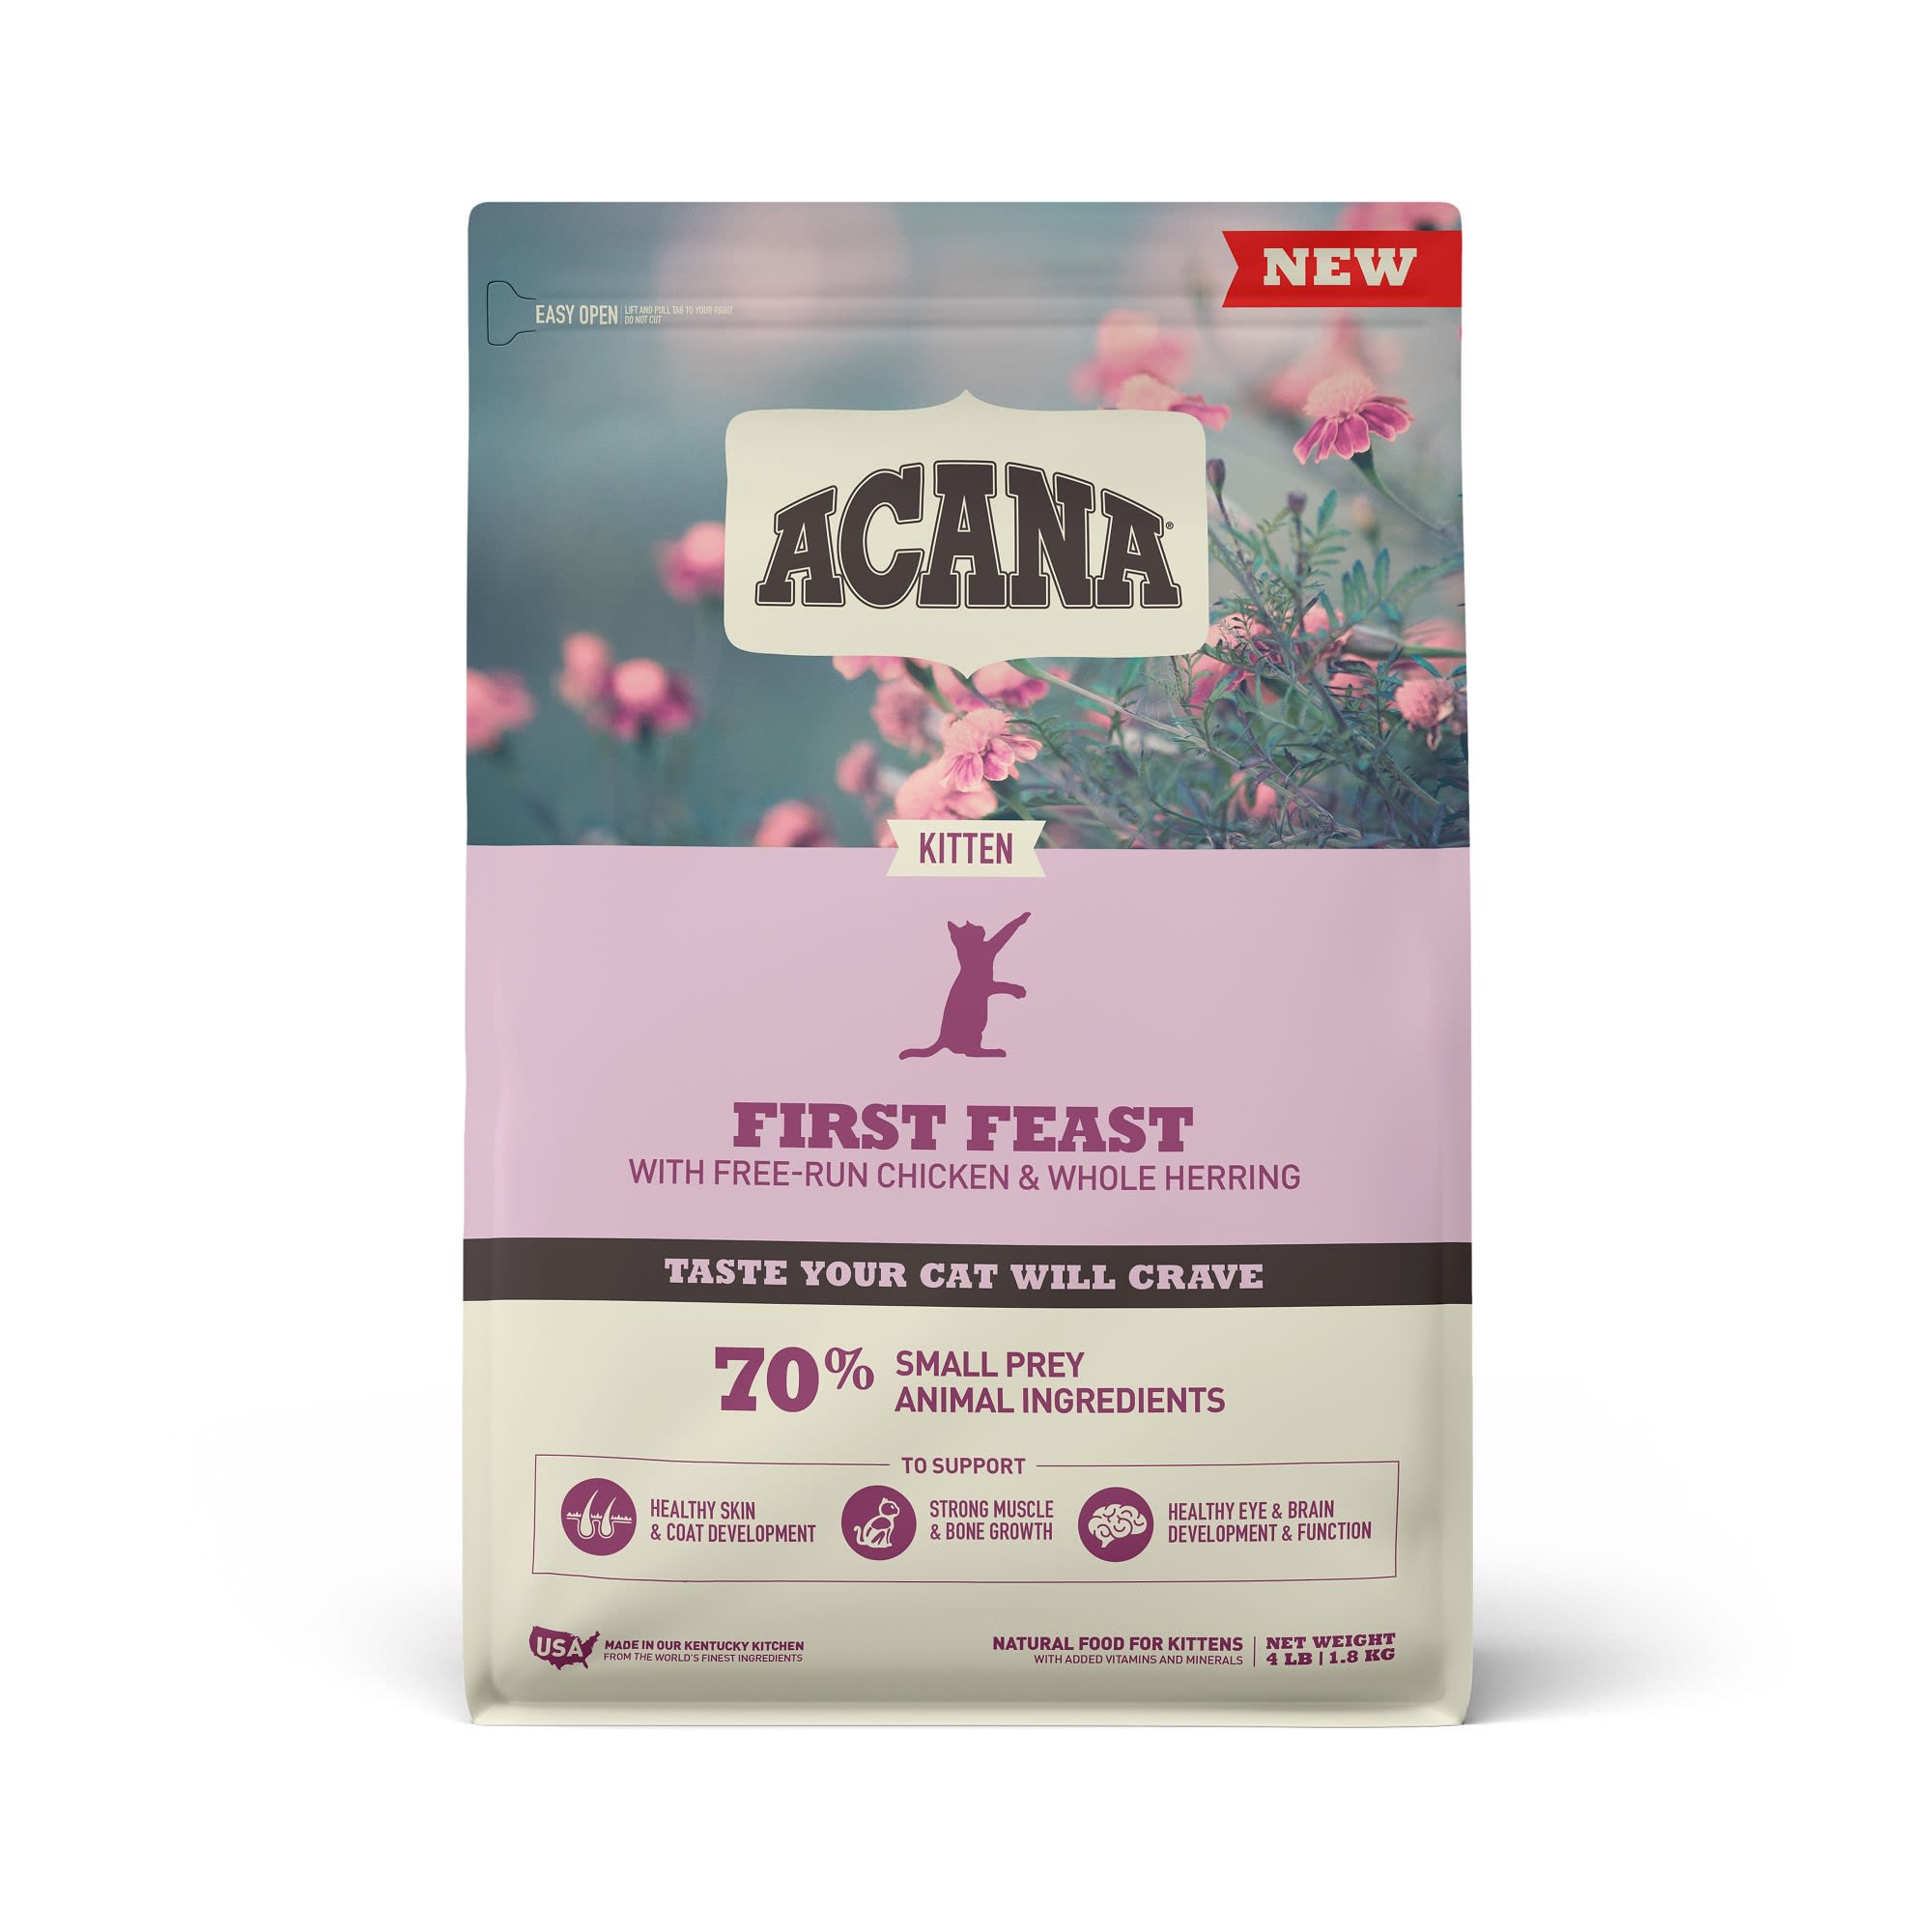 ACANA First Feast For Kittens Chicken and Fish Dry Cat Food, 4 lbs.